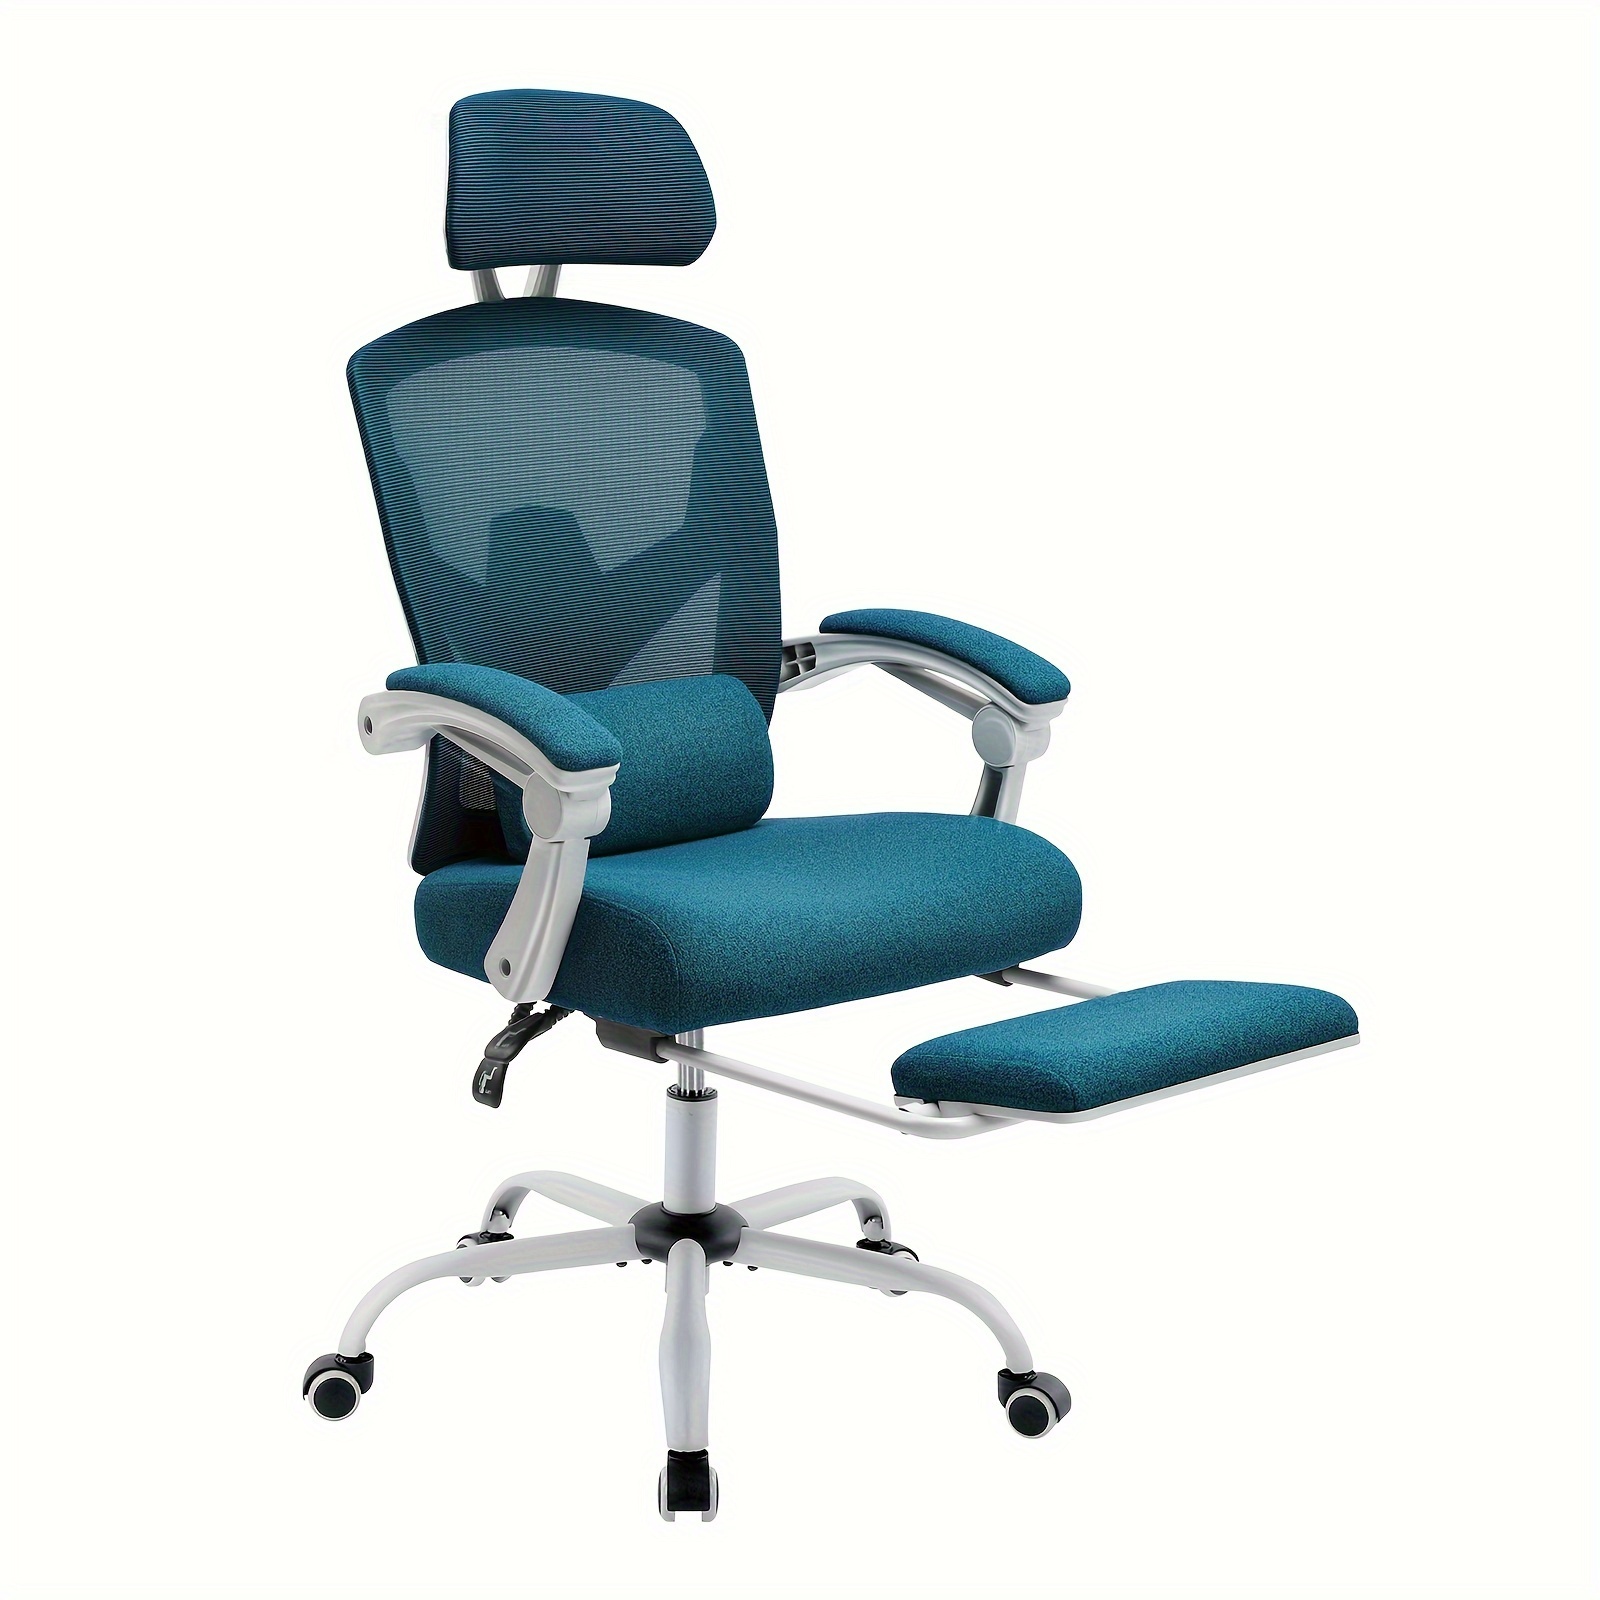 

Office Computer Desk Chair, Ergonomic High-back Mesh Rolling Work Swivel Chairs With Wheels, Comfortable Lumbar Support, Comfy Arms For Home, Gaming Room, Bedroom, Study, Student